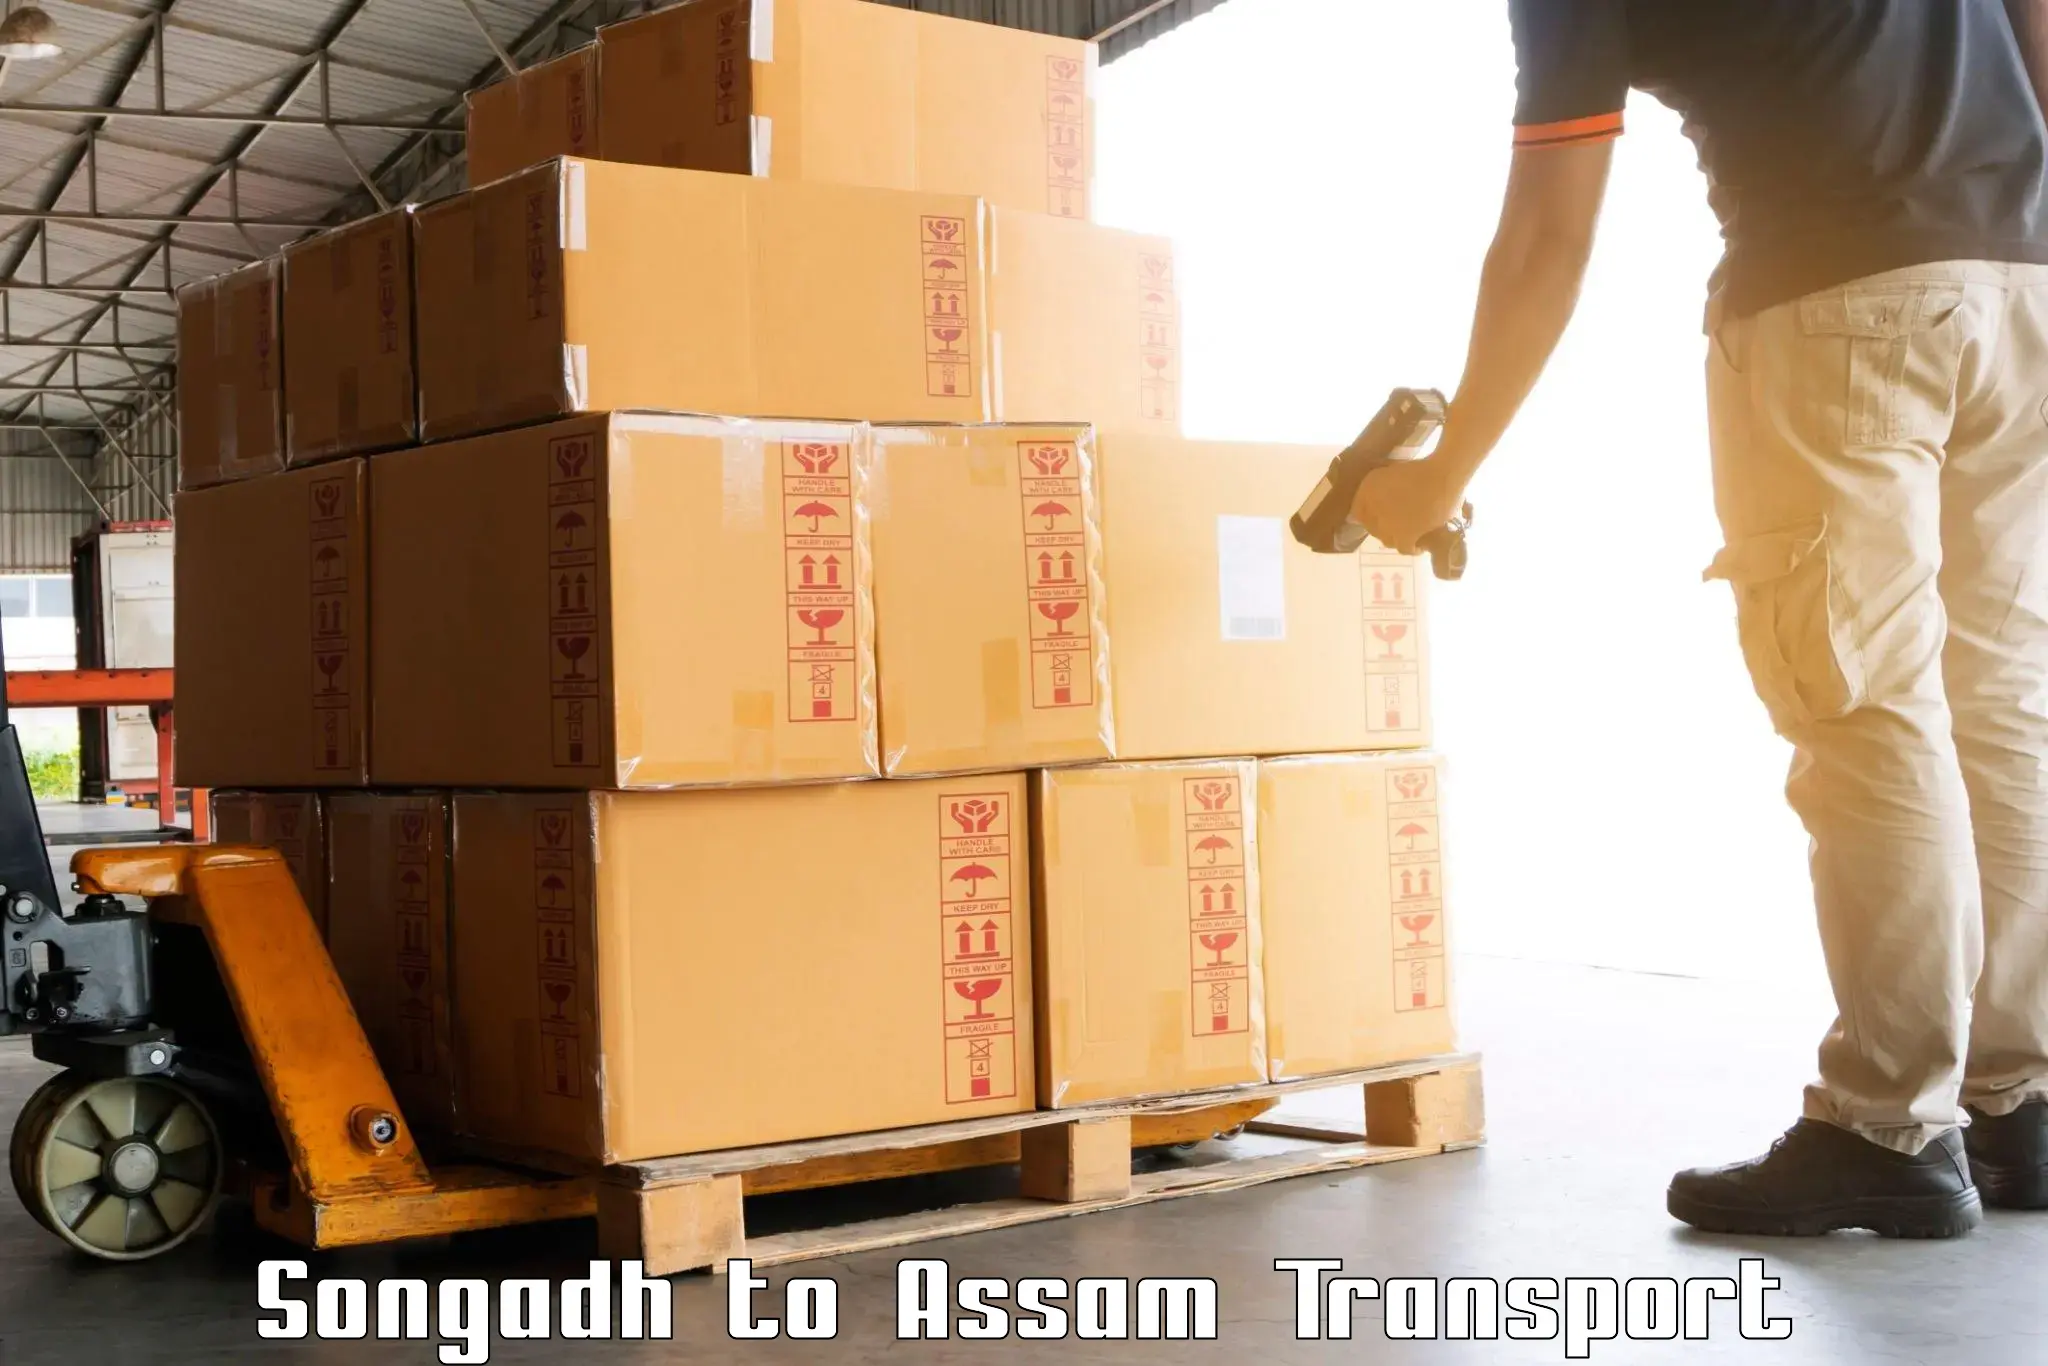 Transport in sharing Songadh to Dergaon